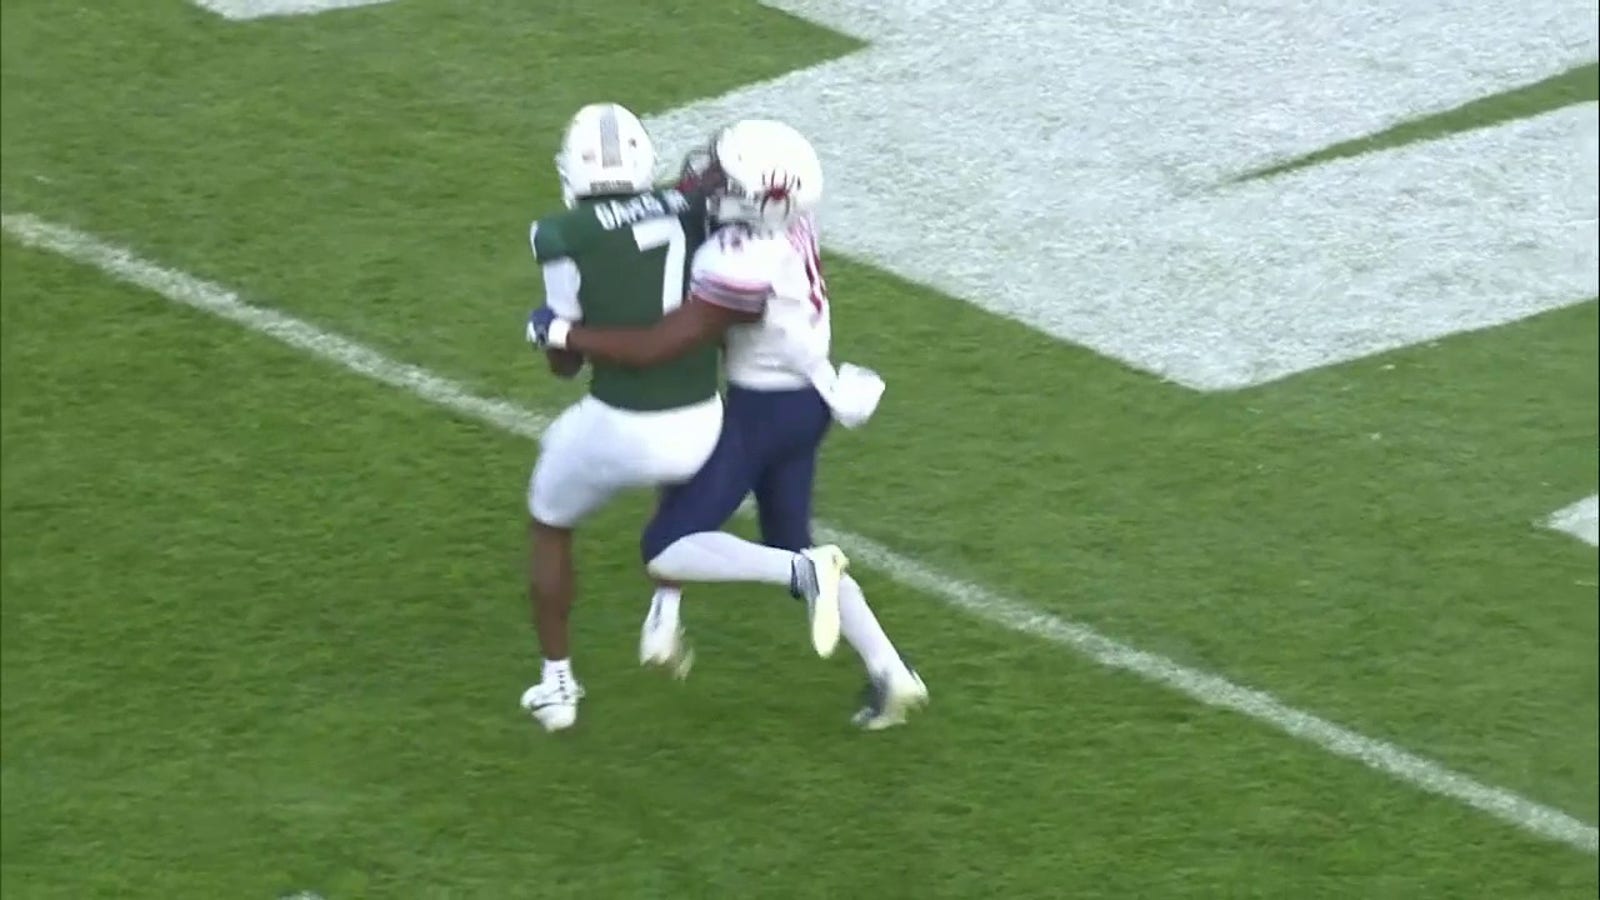 Michigan State's Noah Kim connects with Antonio Gates for a TD 